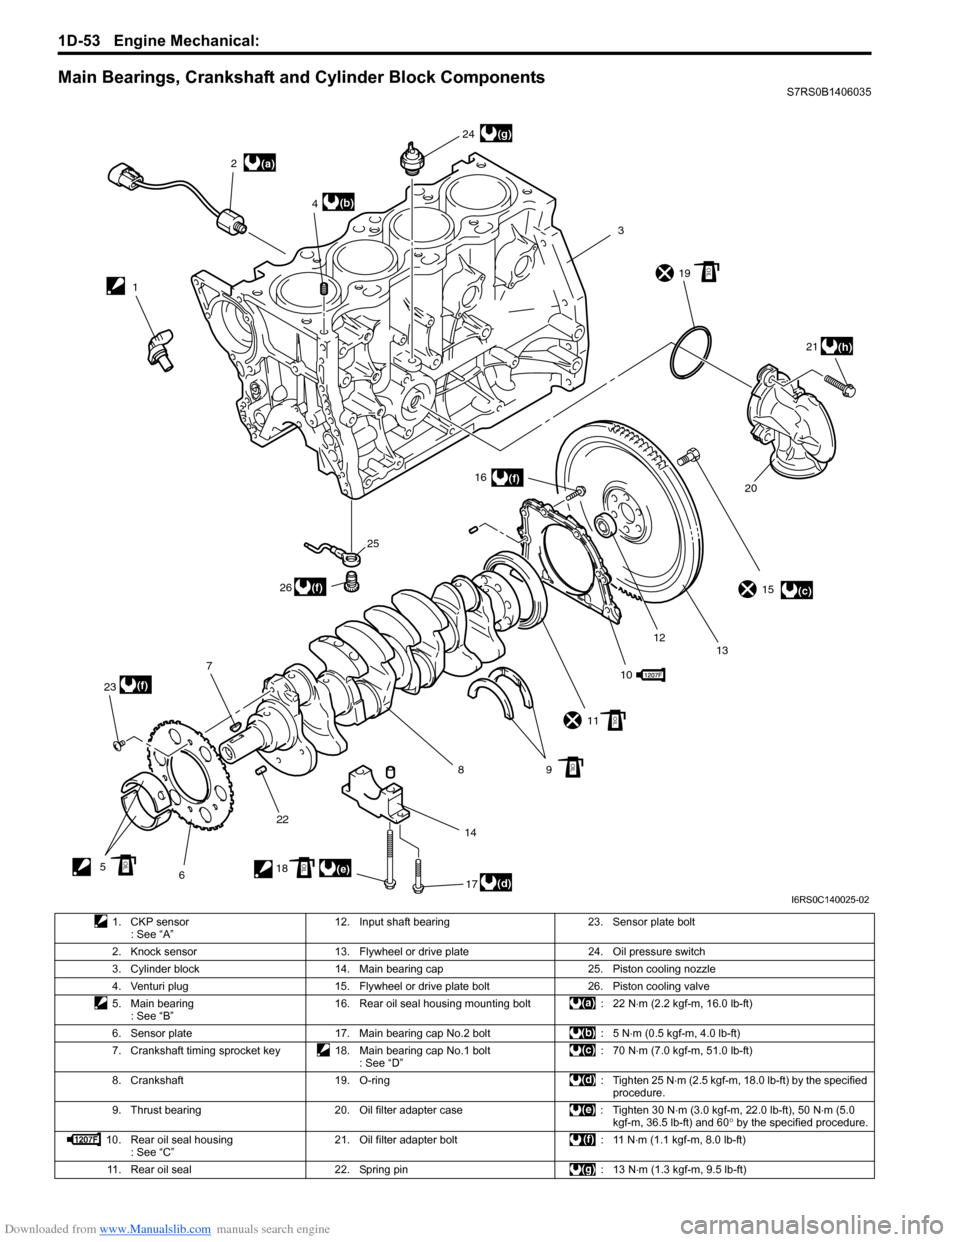 SUZUKI SWIFT 2006 2.G Service User Guide Downloaded from www.Manualslib.com manuals search engine 1D-53 Engine Mechanical: 
Main Bearings, Crankshaft and Cylinder Block ComponentsS7RS0B1406035
(a)
(c)
(d)(e)
(b)
(f)
(f)
(f)
(g)
(h)
12
3
4
5 